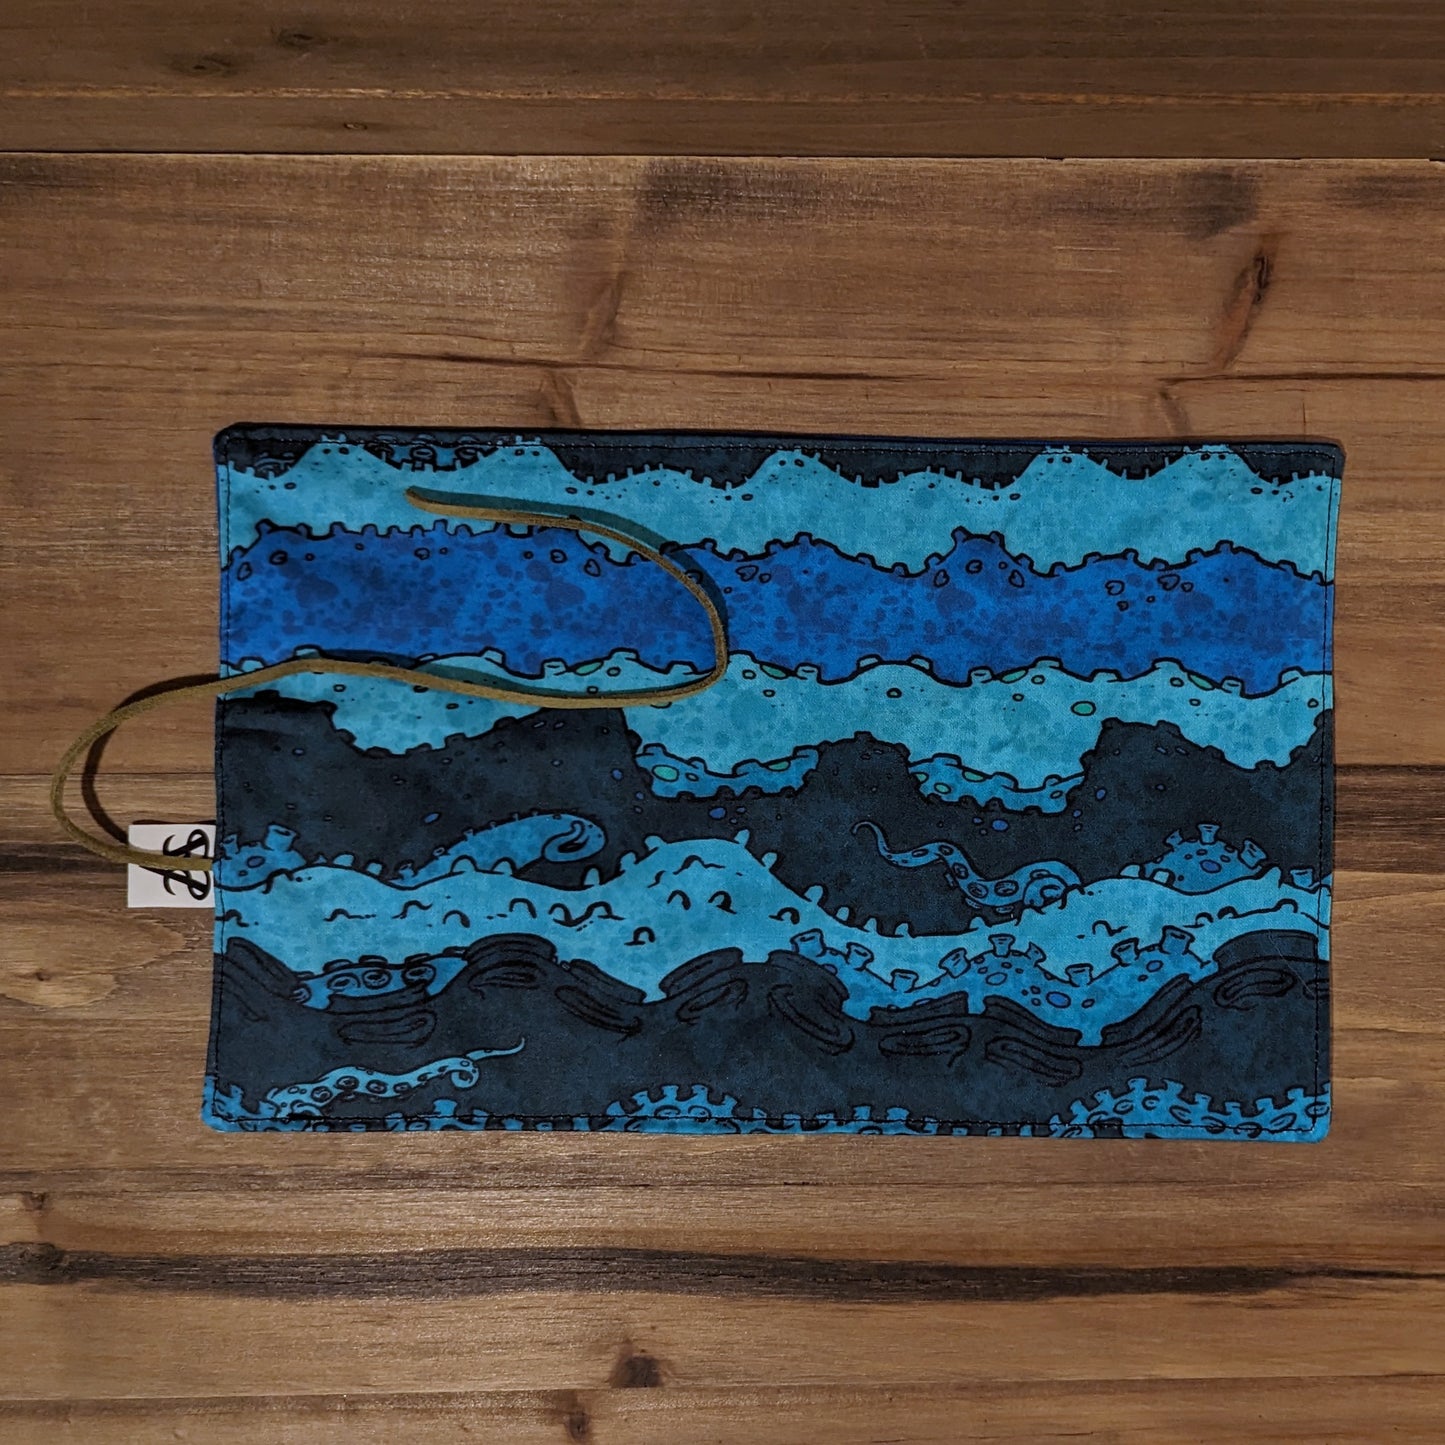 The outside of the Ominous Sea mini utility roll, showing a tentacle and sea foam striped pattern in shades of blue and teal with a green leather cord.